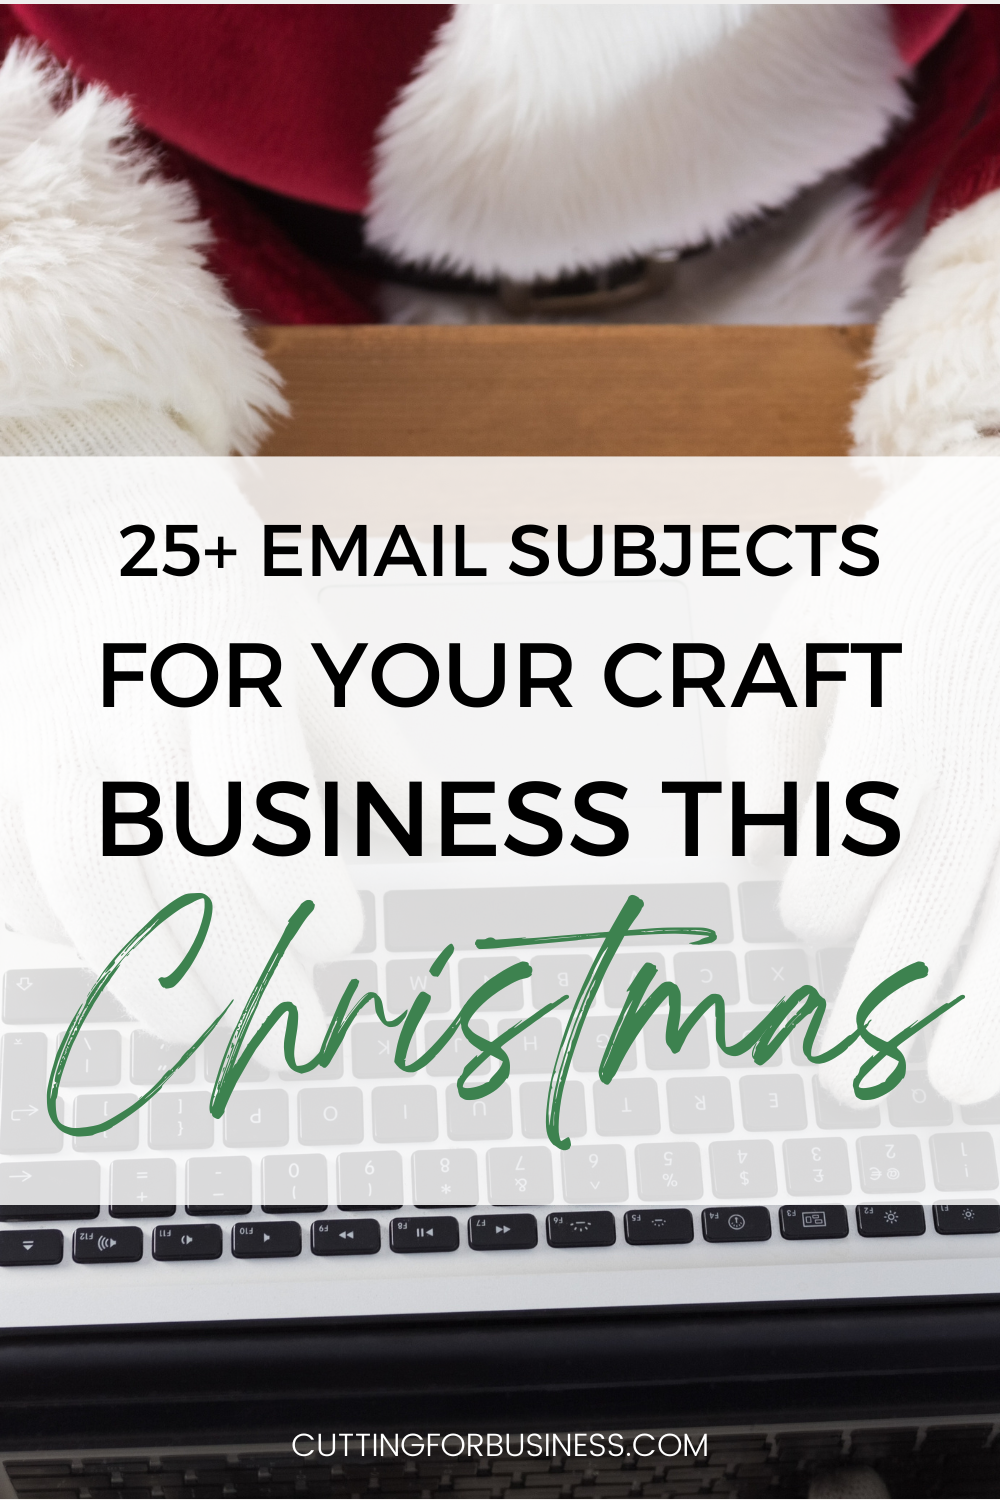 A list of 25+ Creative Email Subject Lines for Christmas in Your Craft Business - Perfect for Silhouette, Cricut, and Glowforge crafters - by cuttingforbusiness.com.